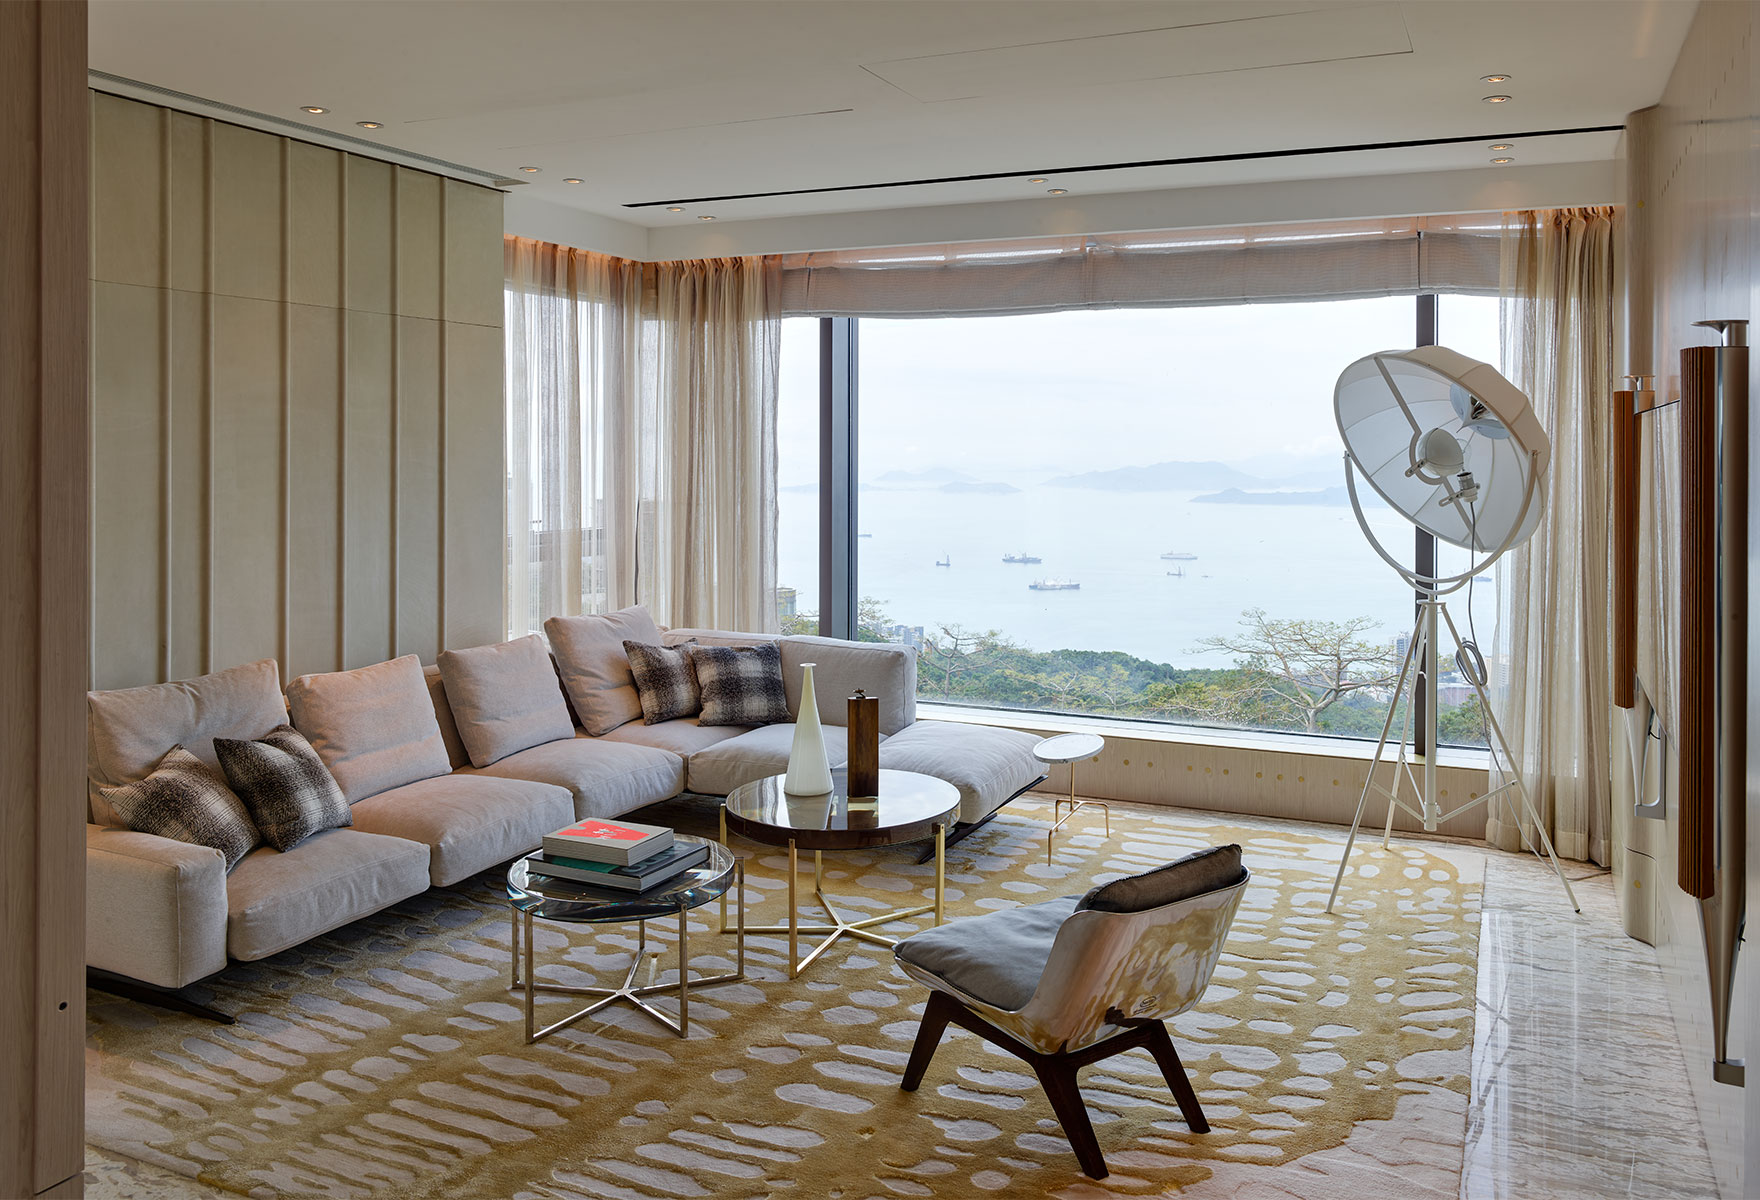 Victoria Harbour Residence, Hong Kong